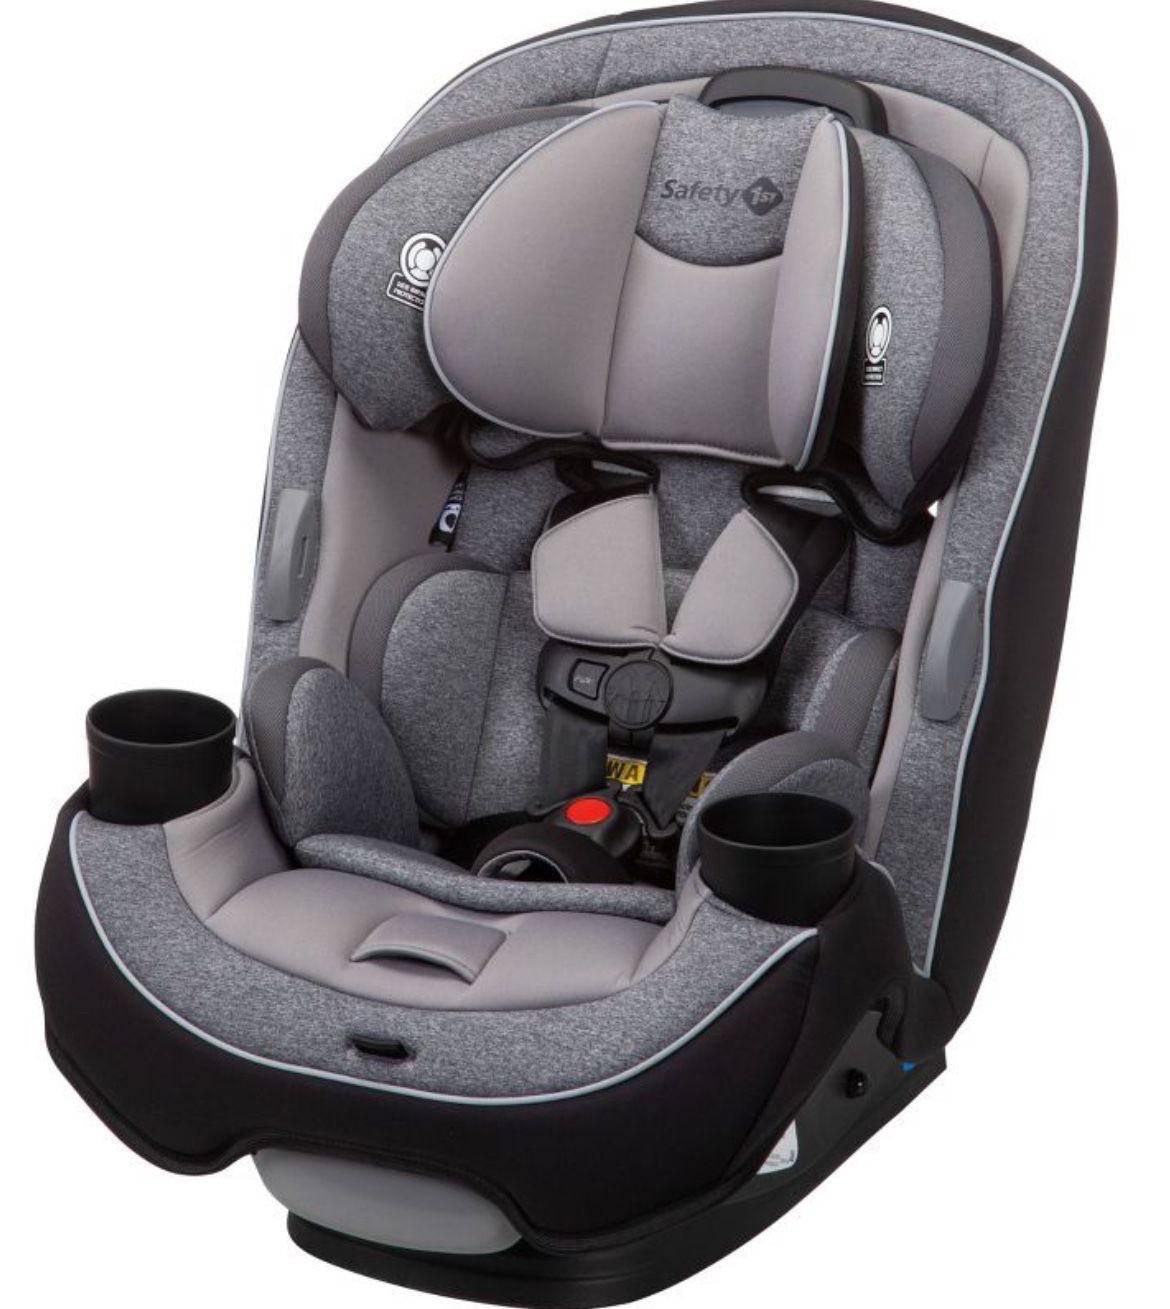 Car seat - Safety 1st Grow And Go (NEW)